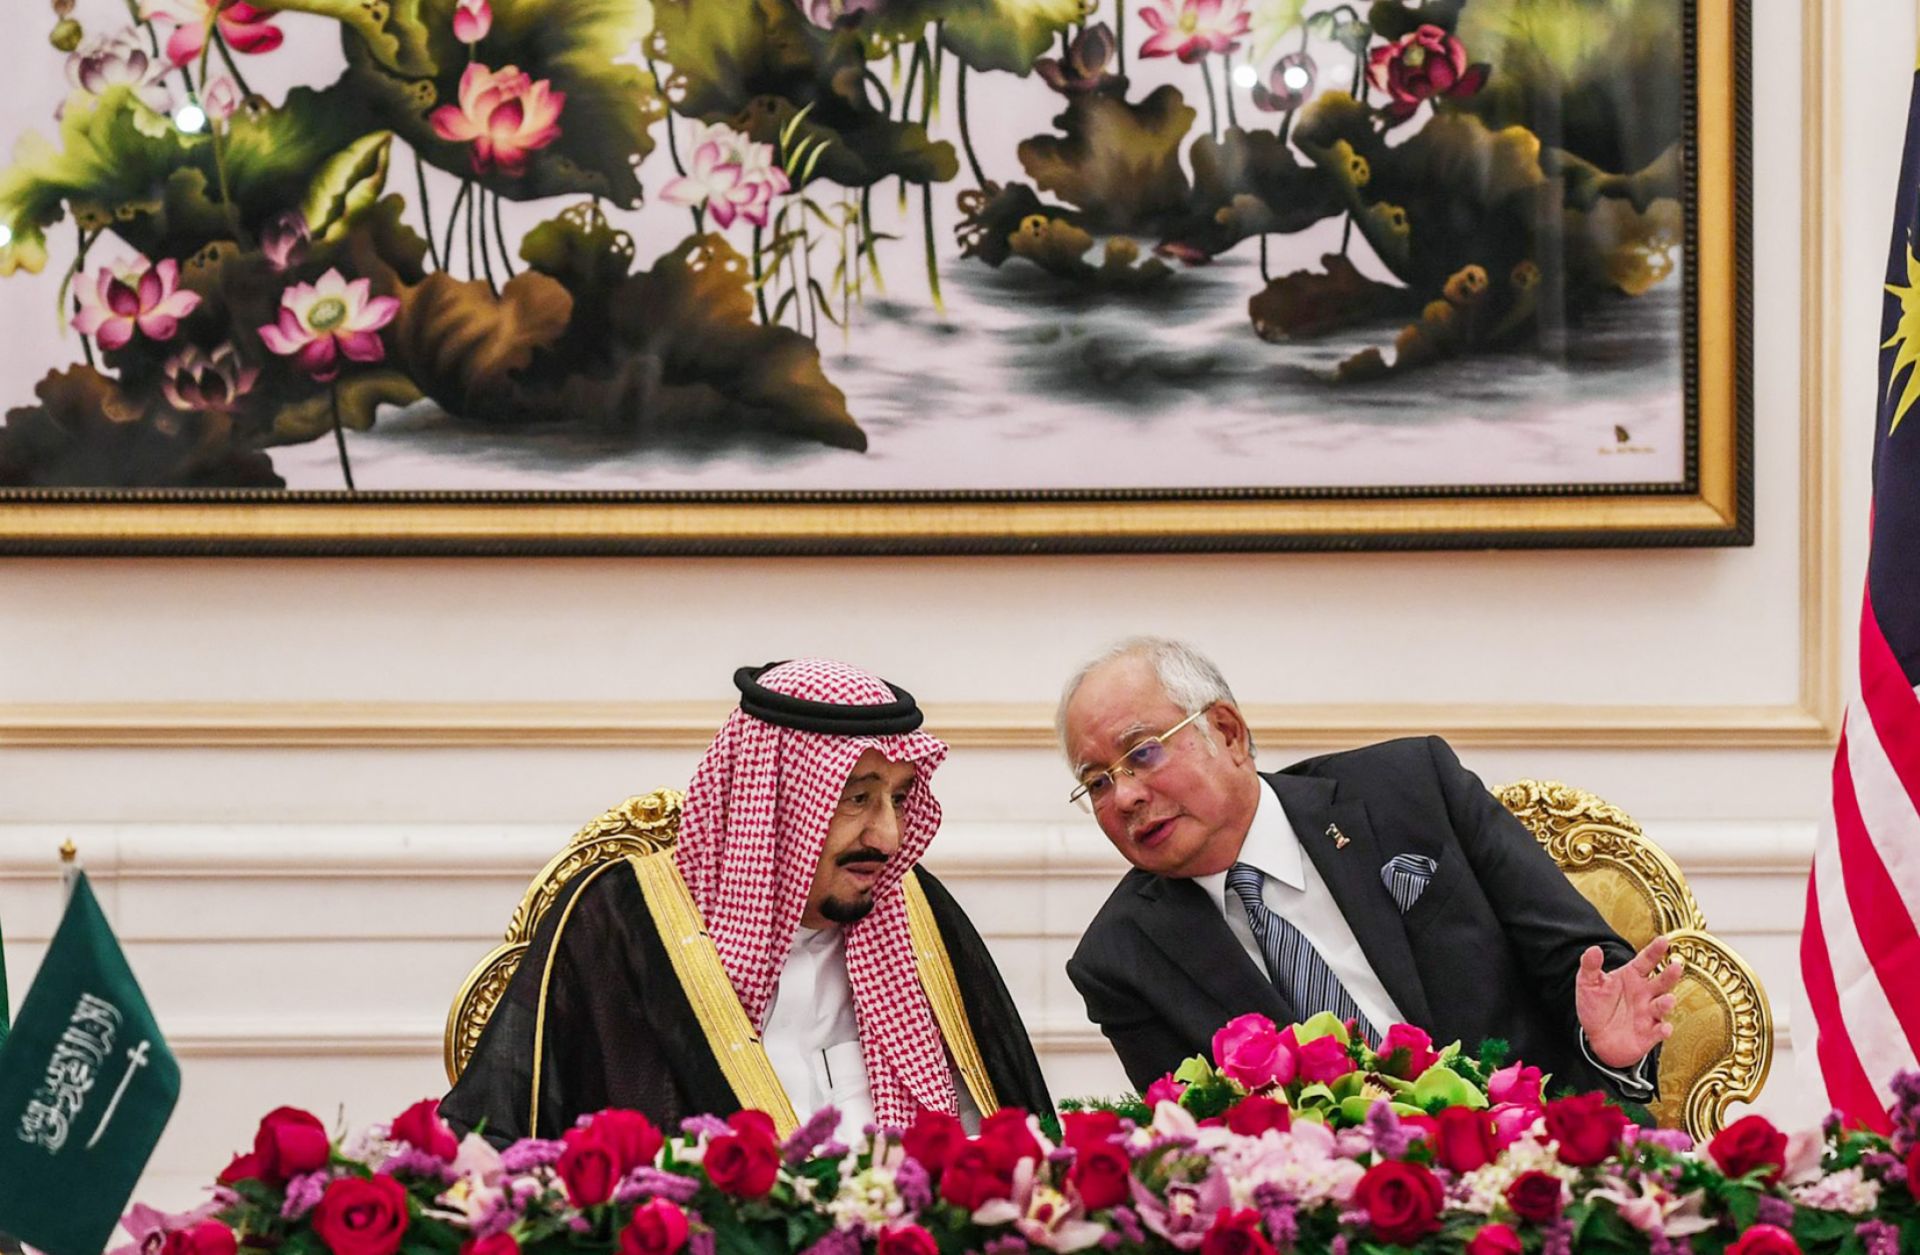 Saudi King Salman is on the hunt for investors and investment in Asia